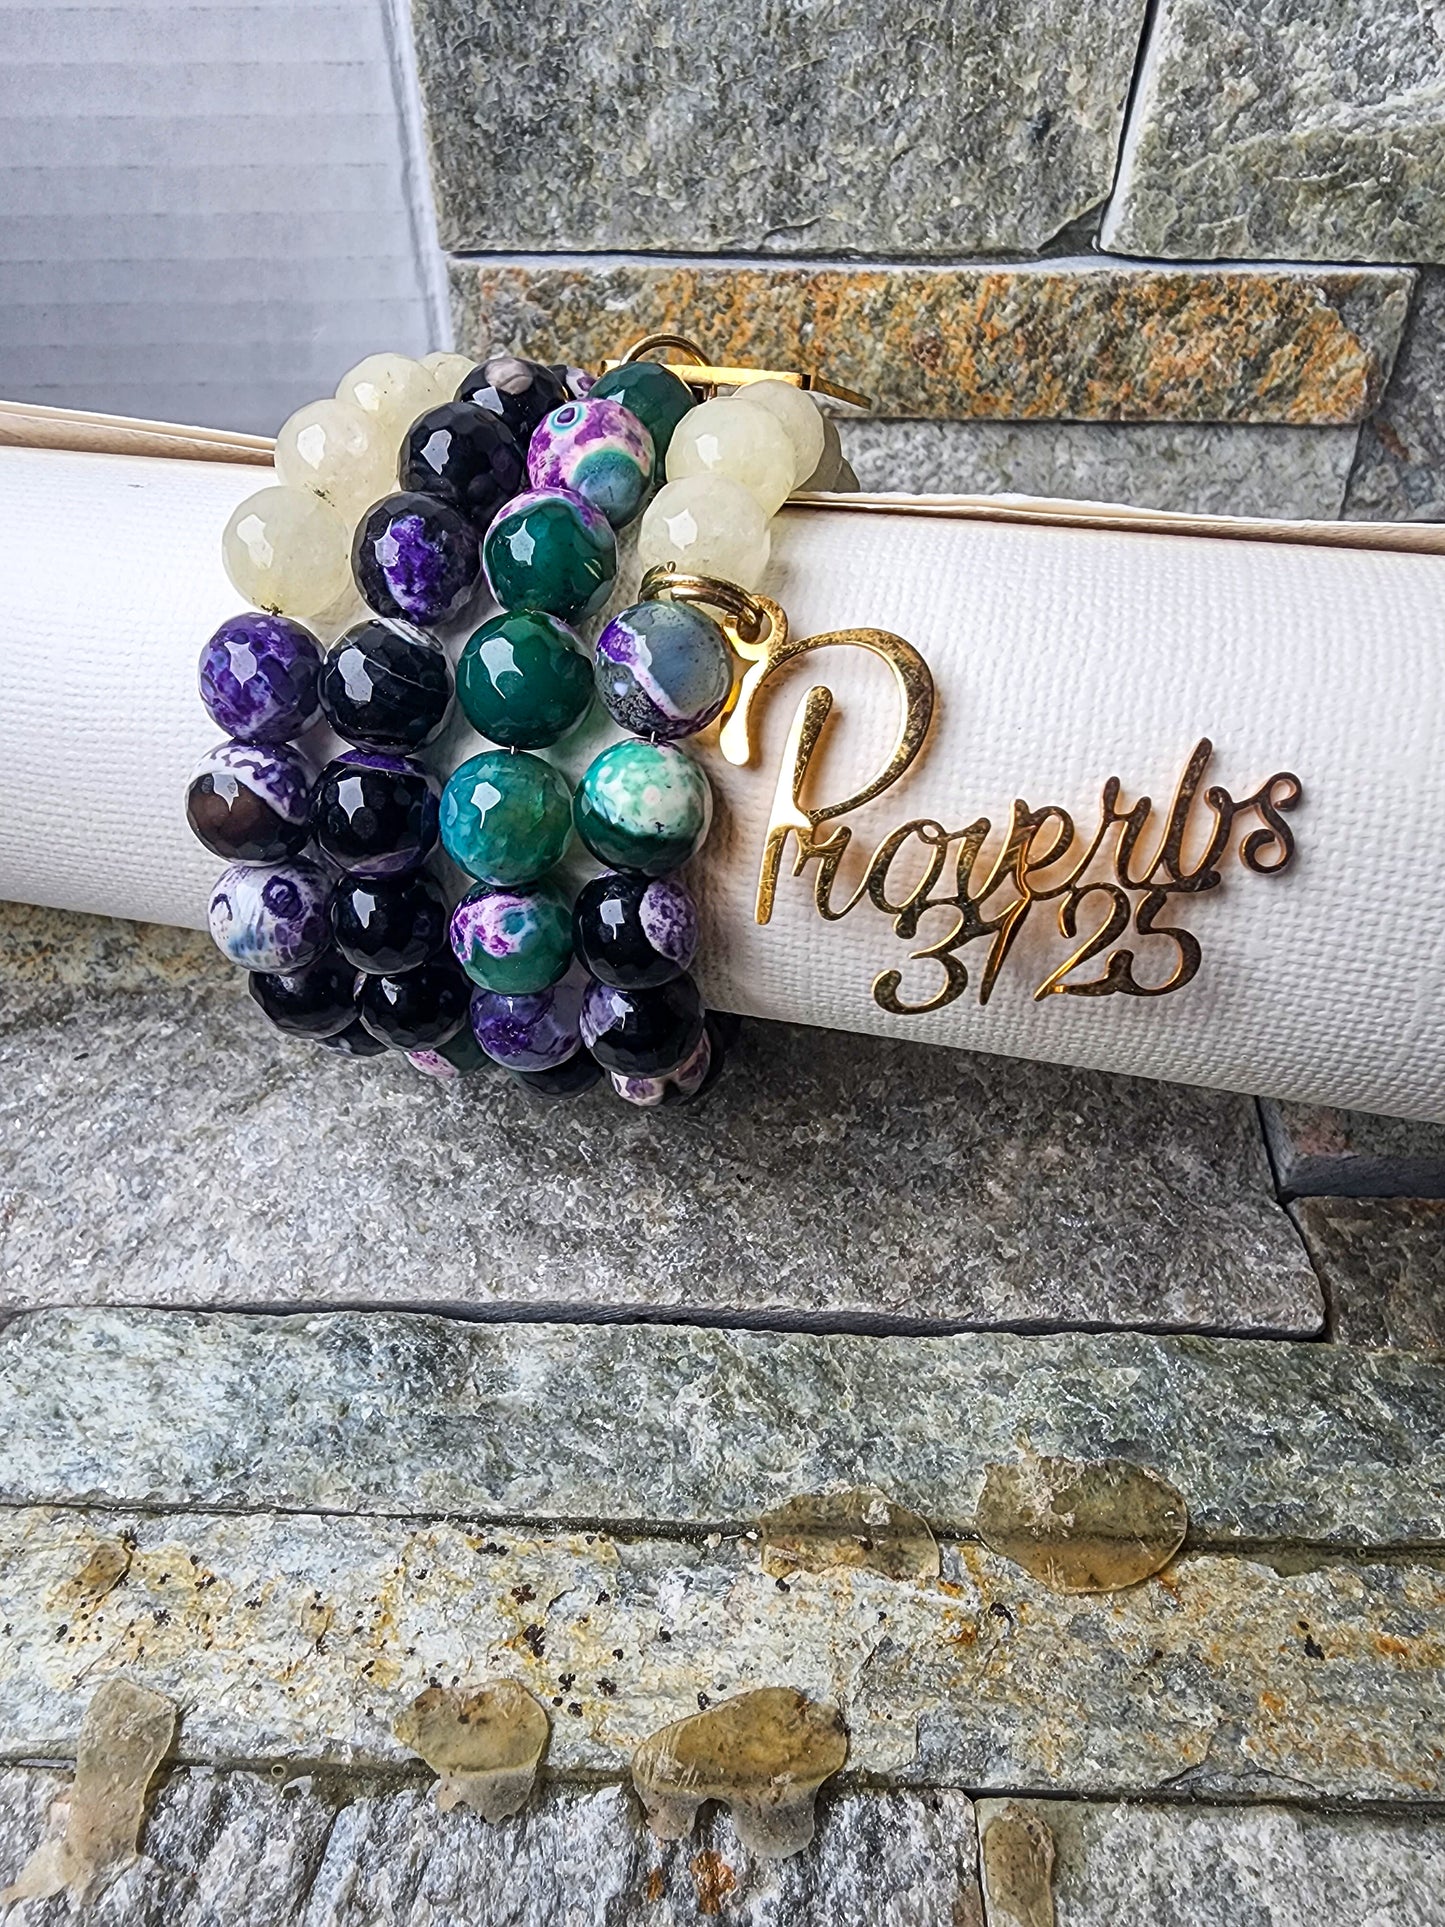 Proverbs : Wire-Wrapped Green and Purple Agate Bracelet